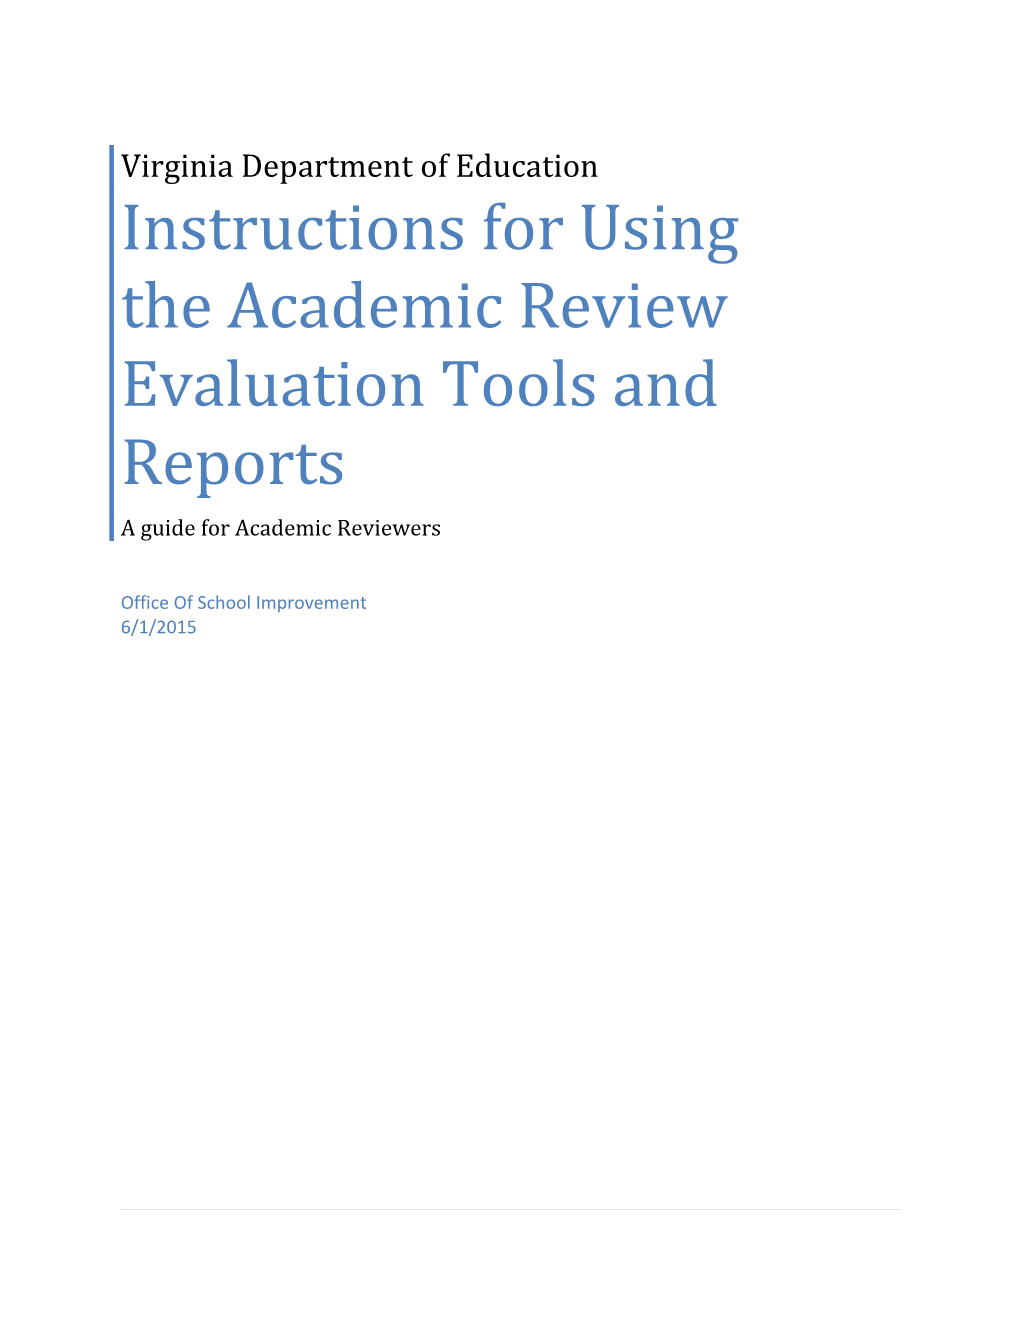 Instructions for Using the Academic Review Evaluation Tools and Reports